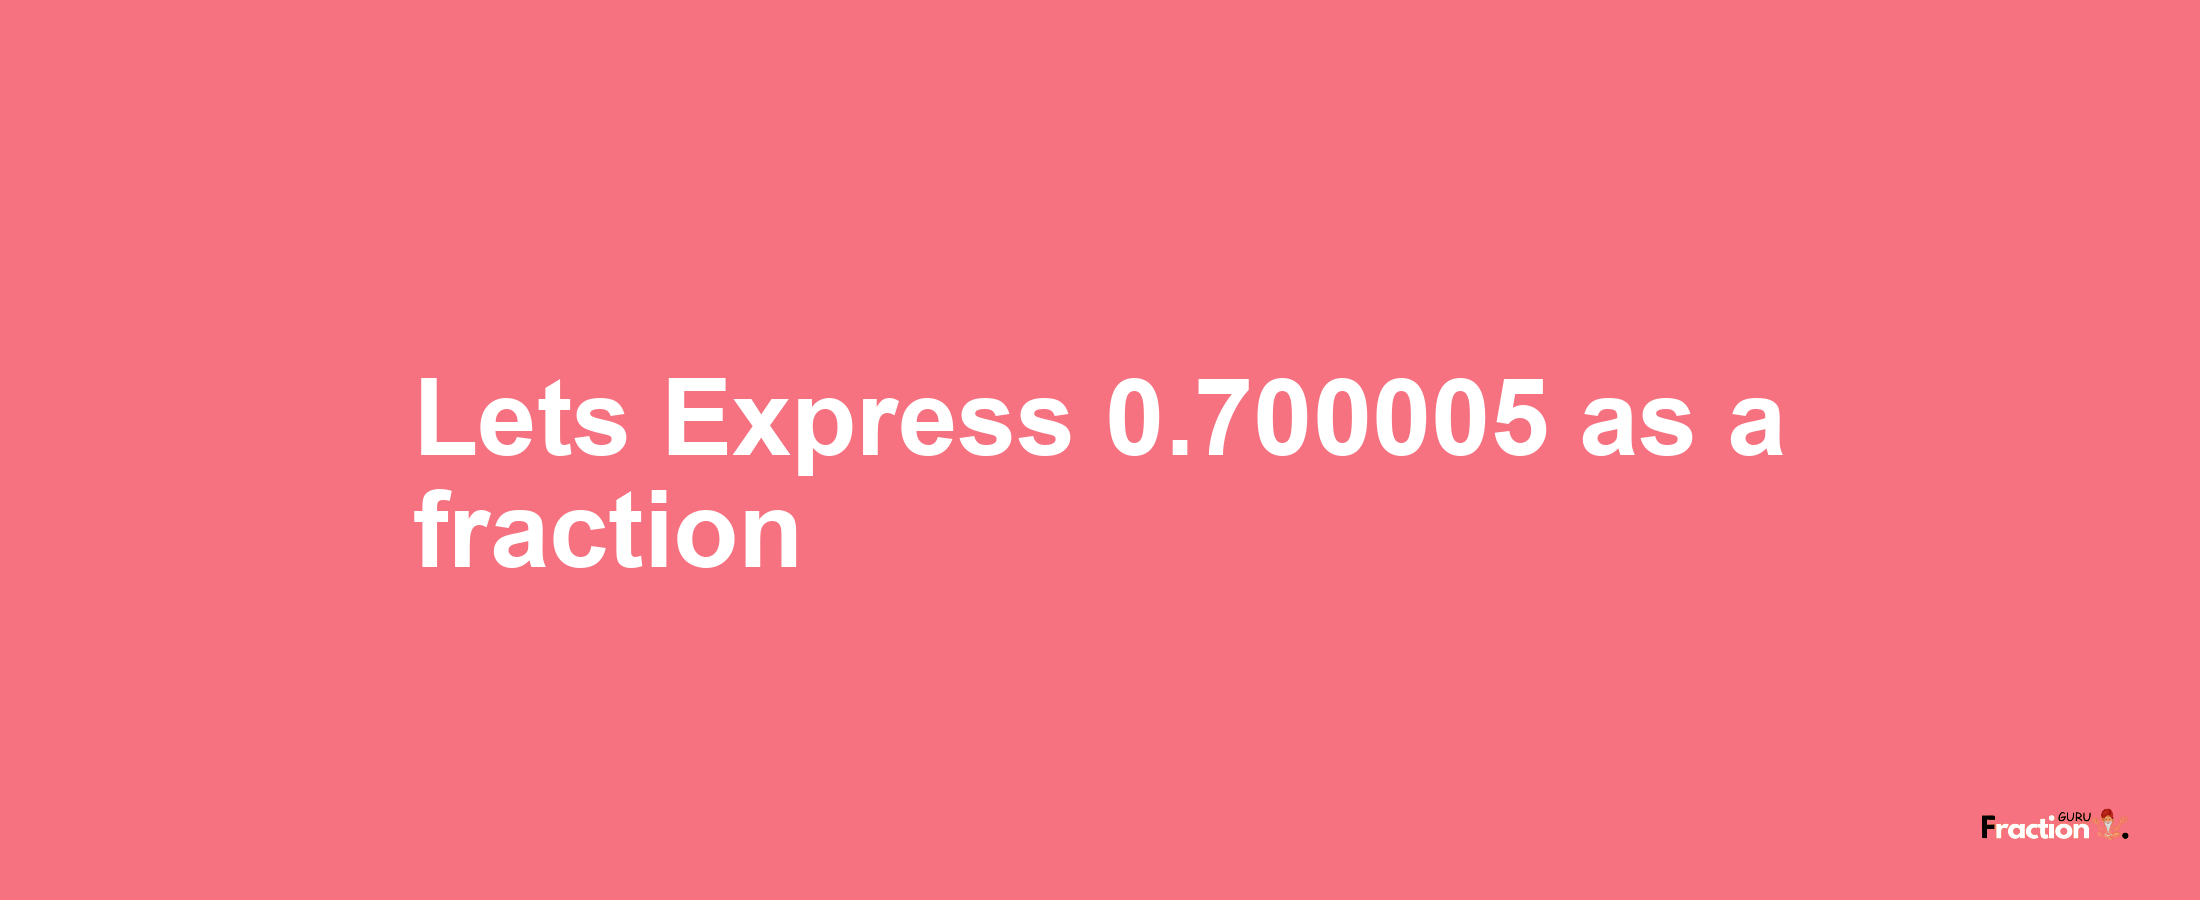 Lets Express 0.700005 as afraction